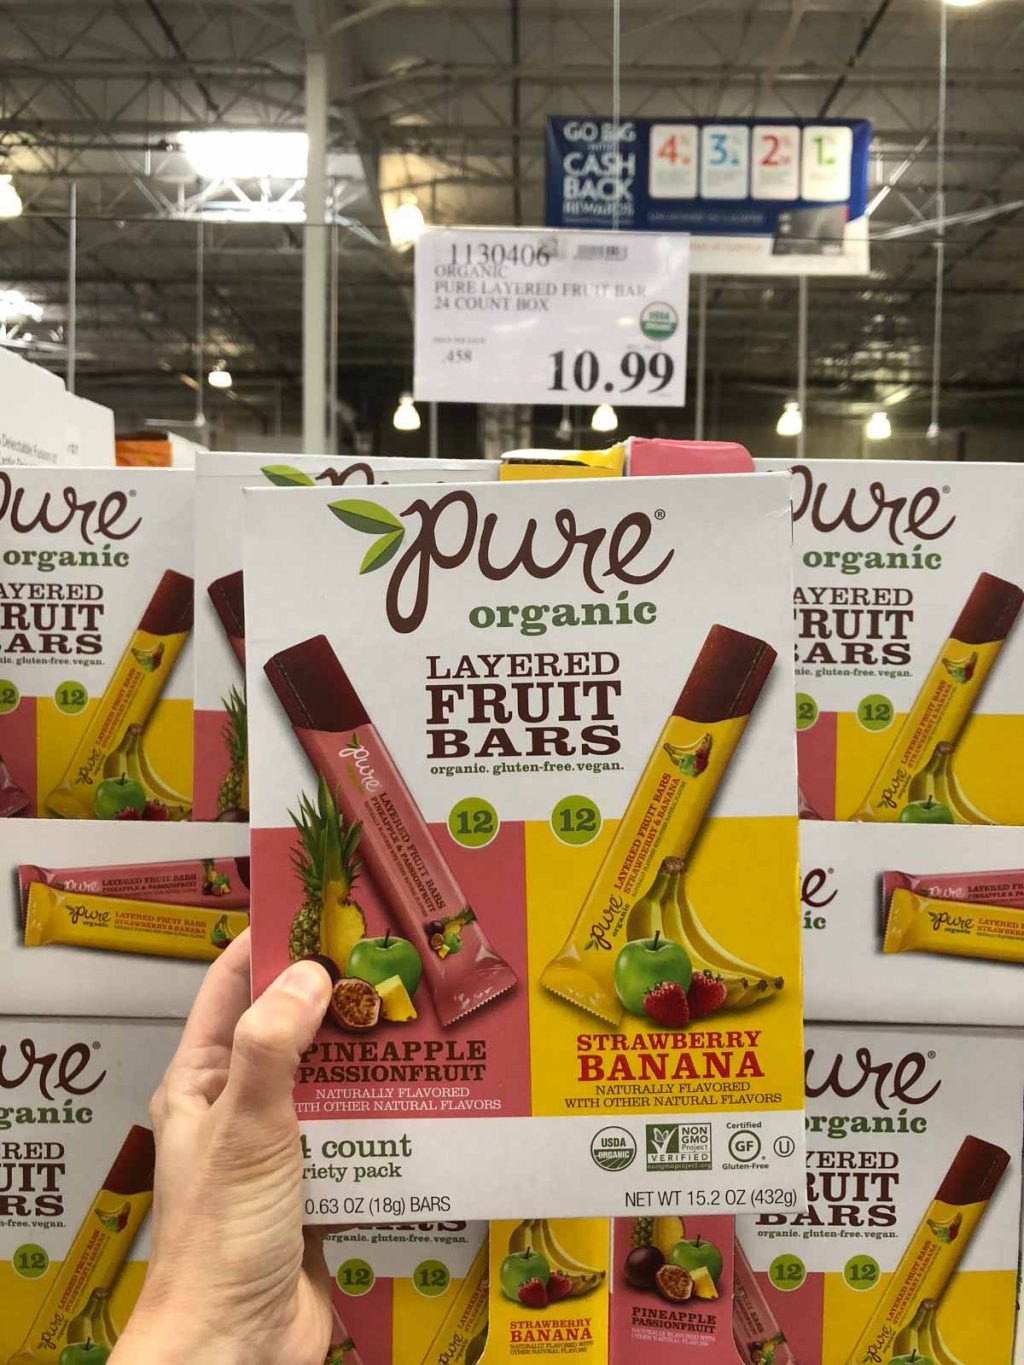 A hand holding a box of Pure organic vegan layered fruit bars for $10.99 at Costco.